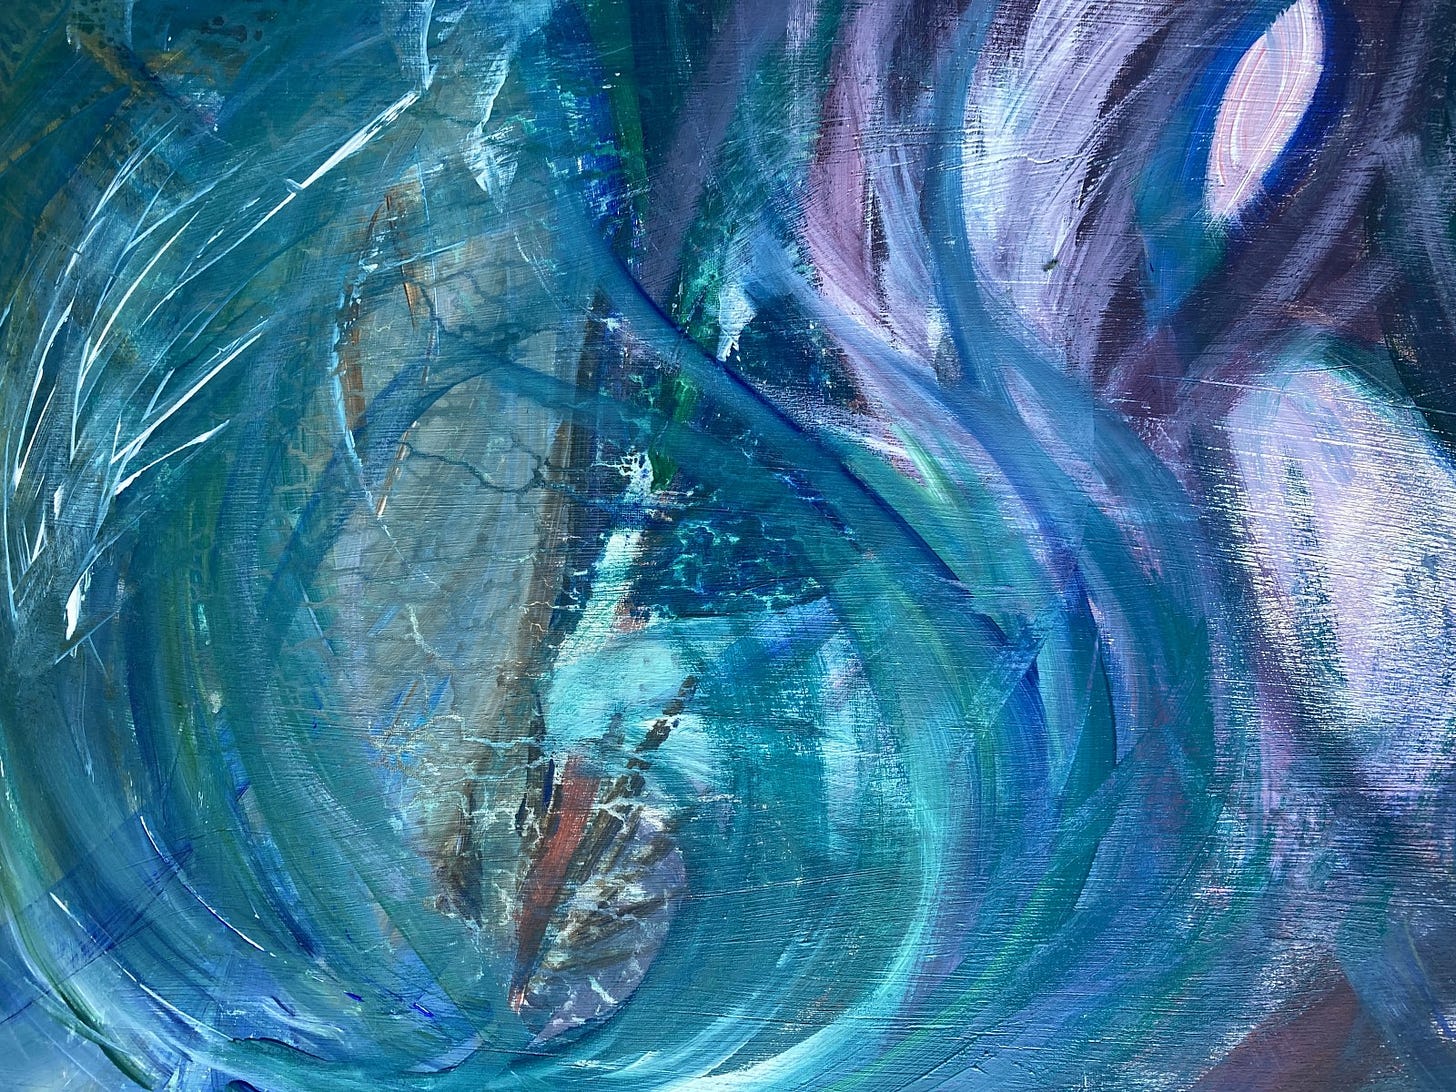 Abstract in acrylics — a suggested figure to the right looking away from a wave-engulfed craft to the left. Thinking about the experience, not being in it.